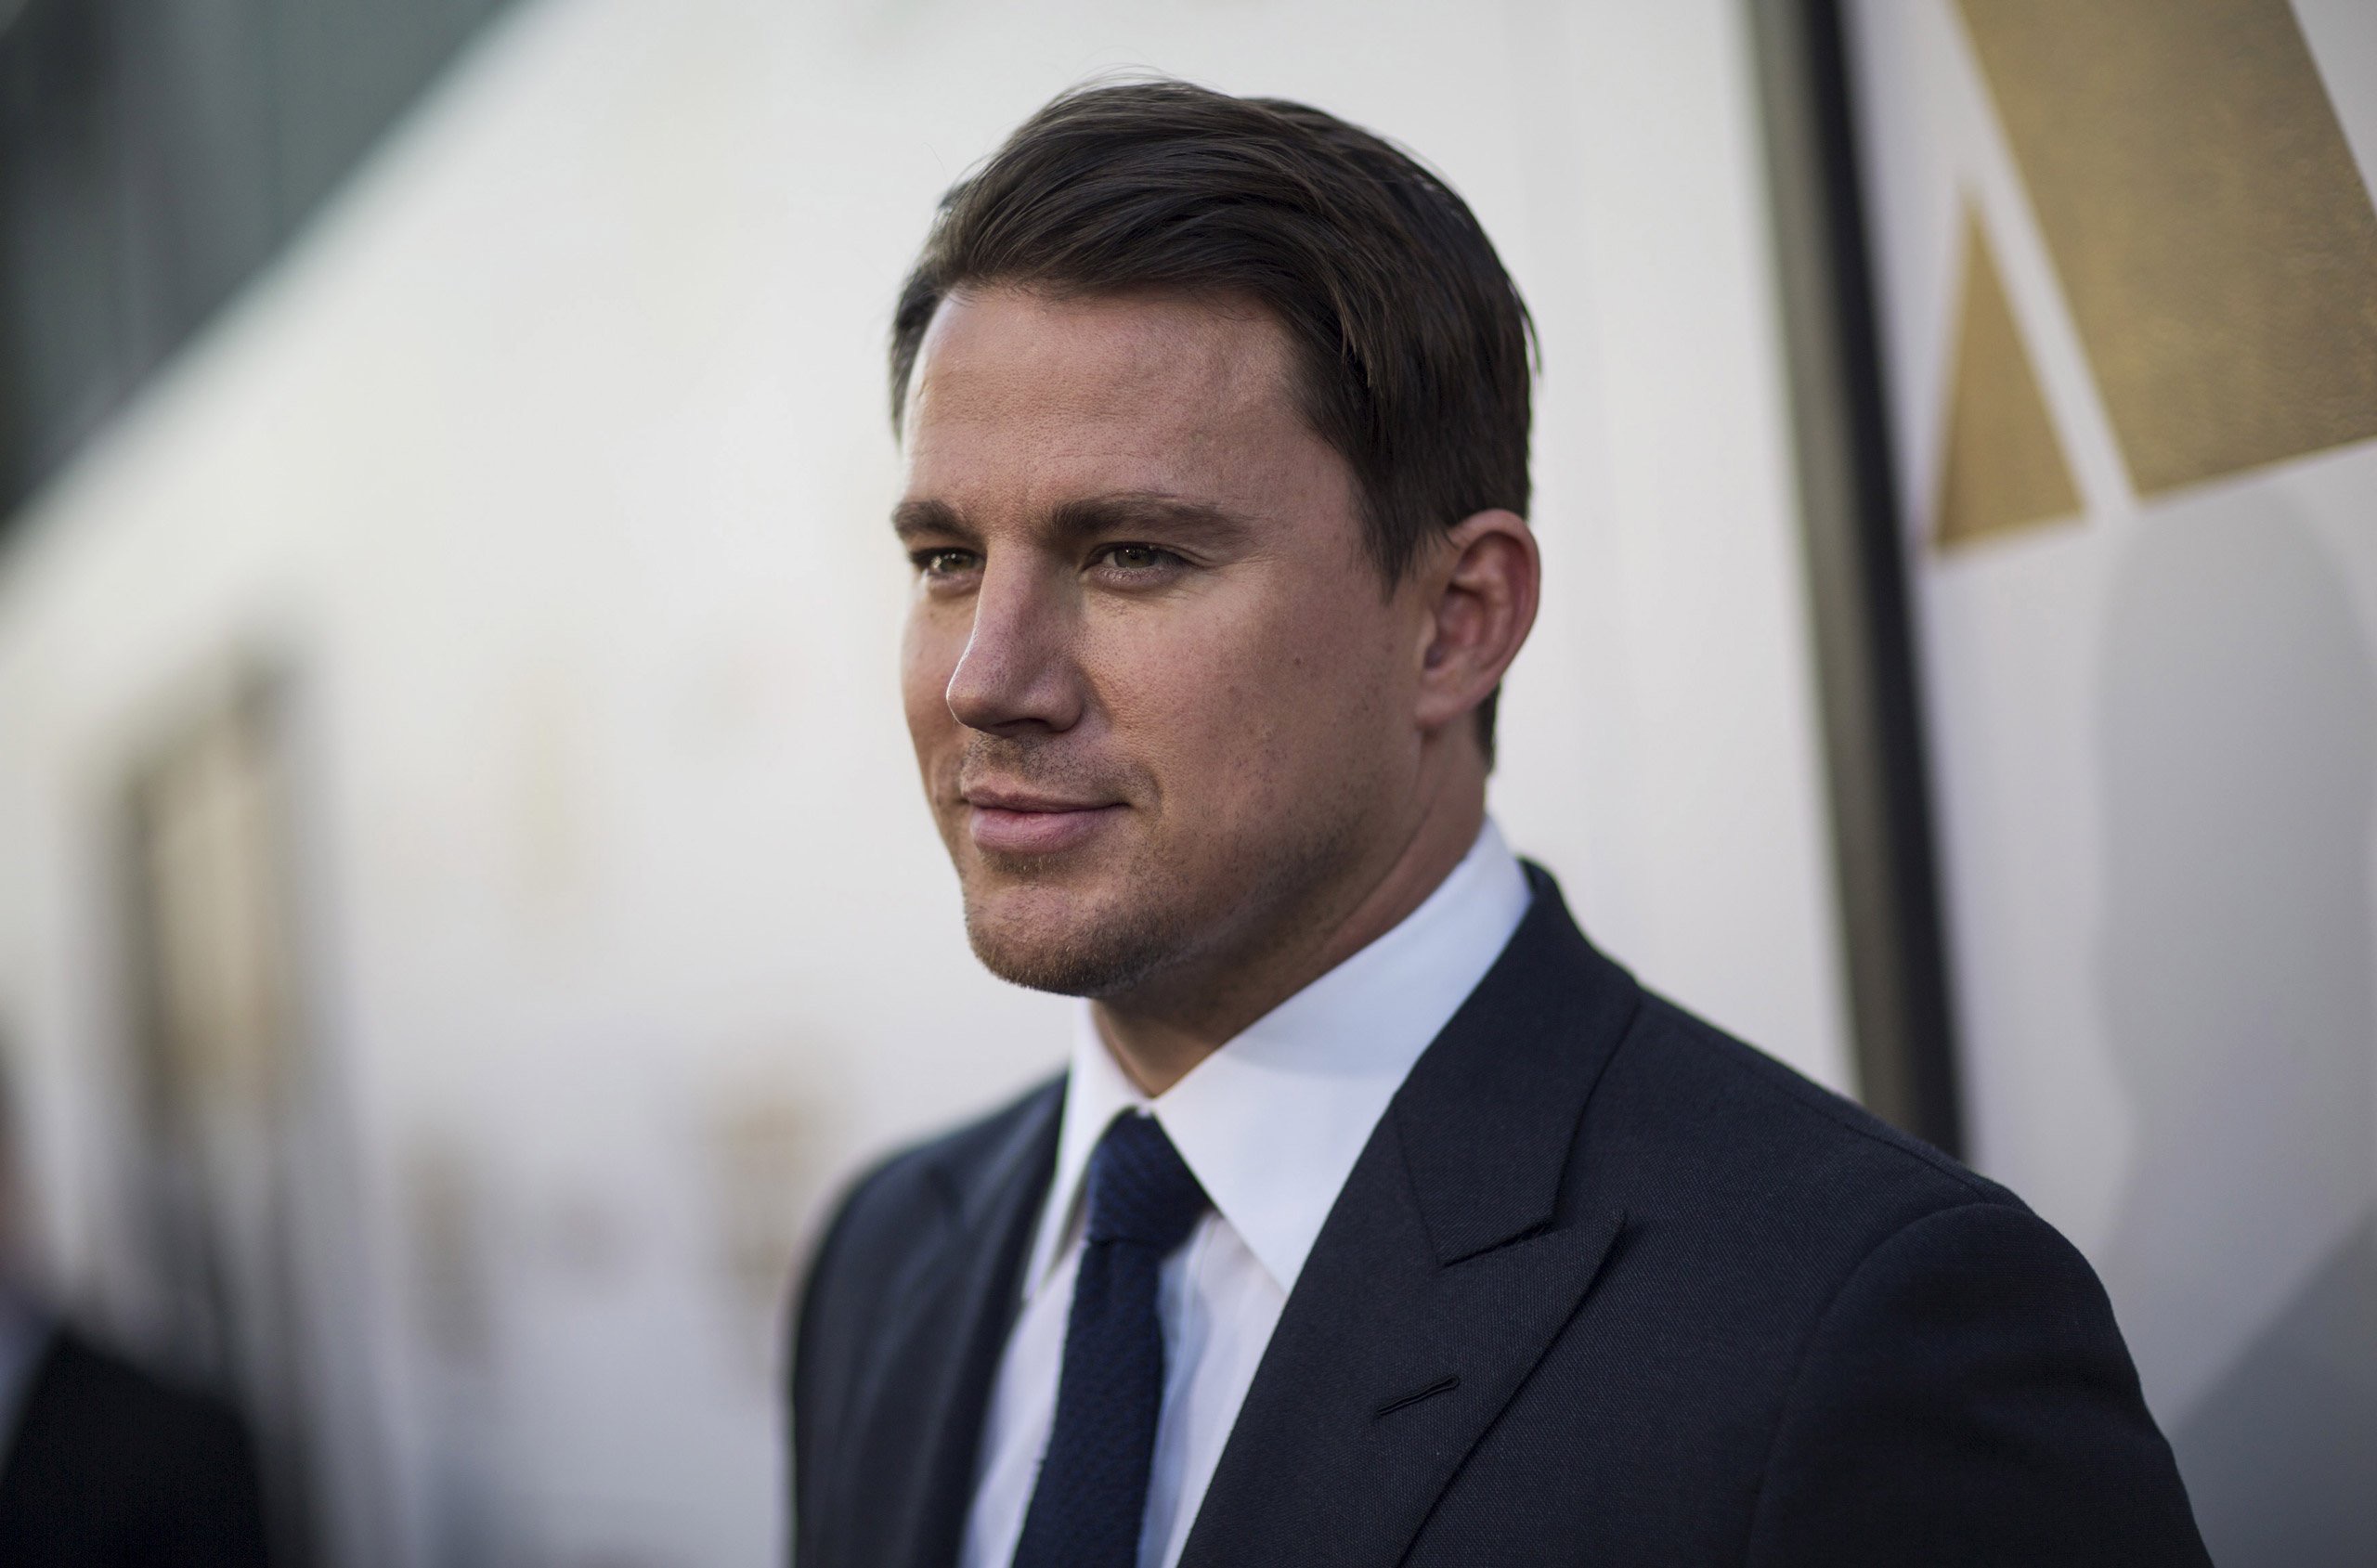 Channing Tatum Ends All Ties With Weinstein Company